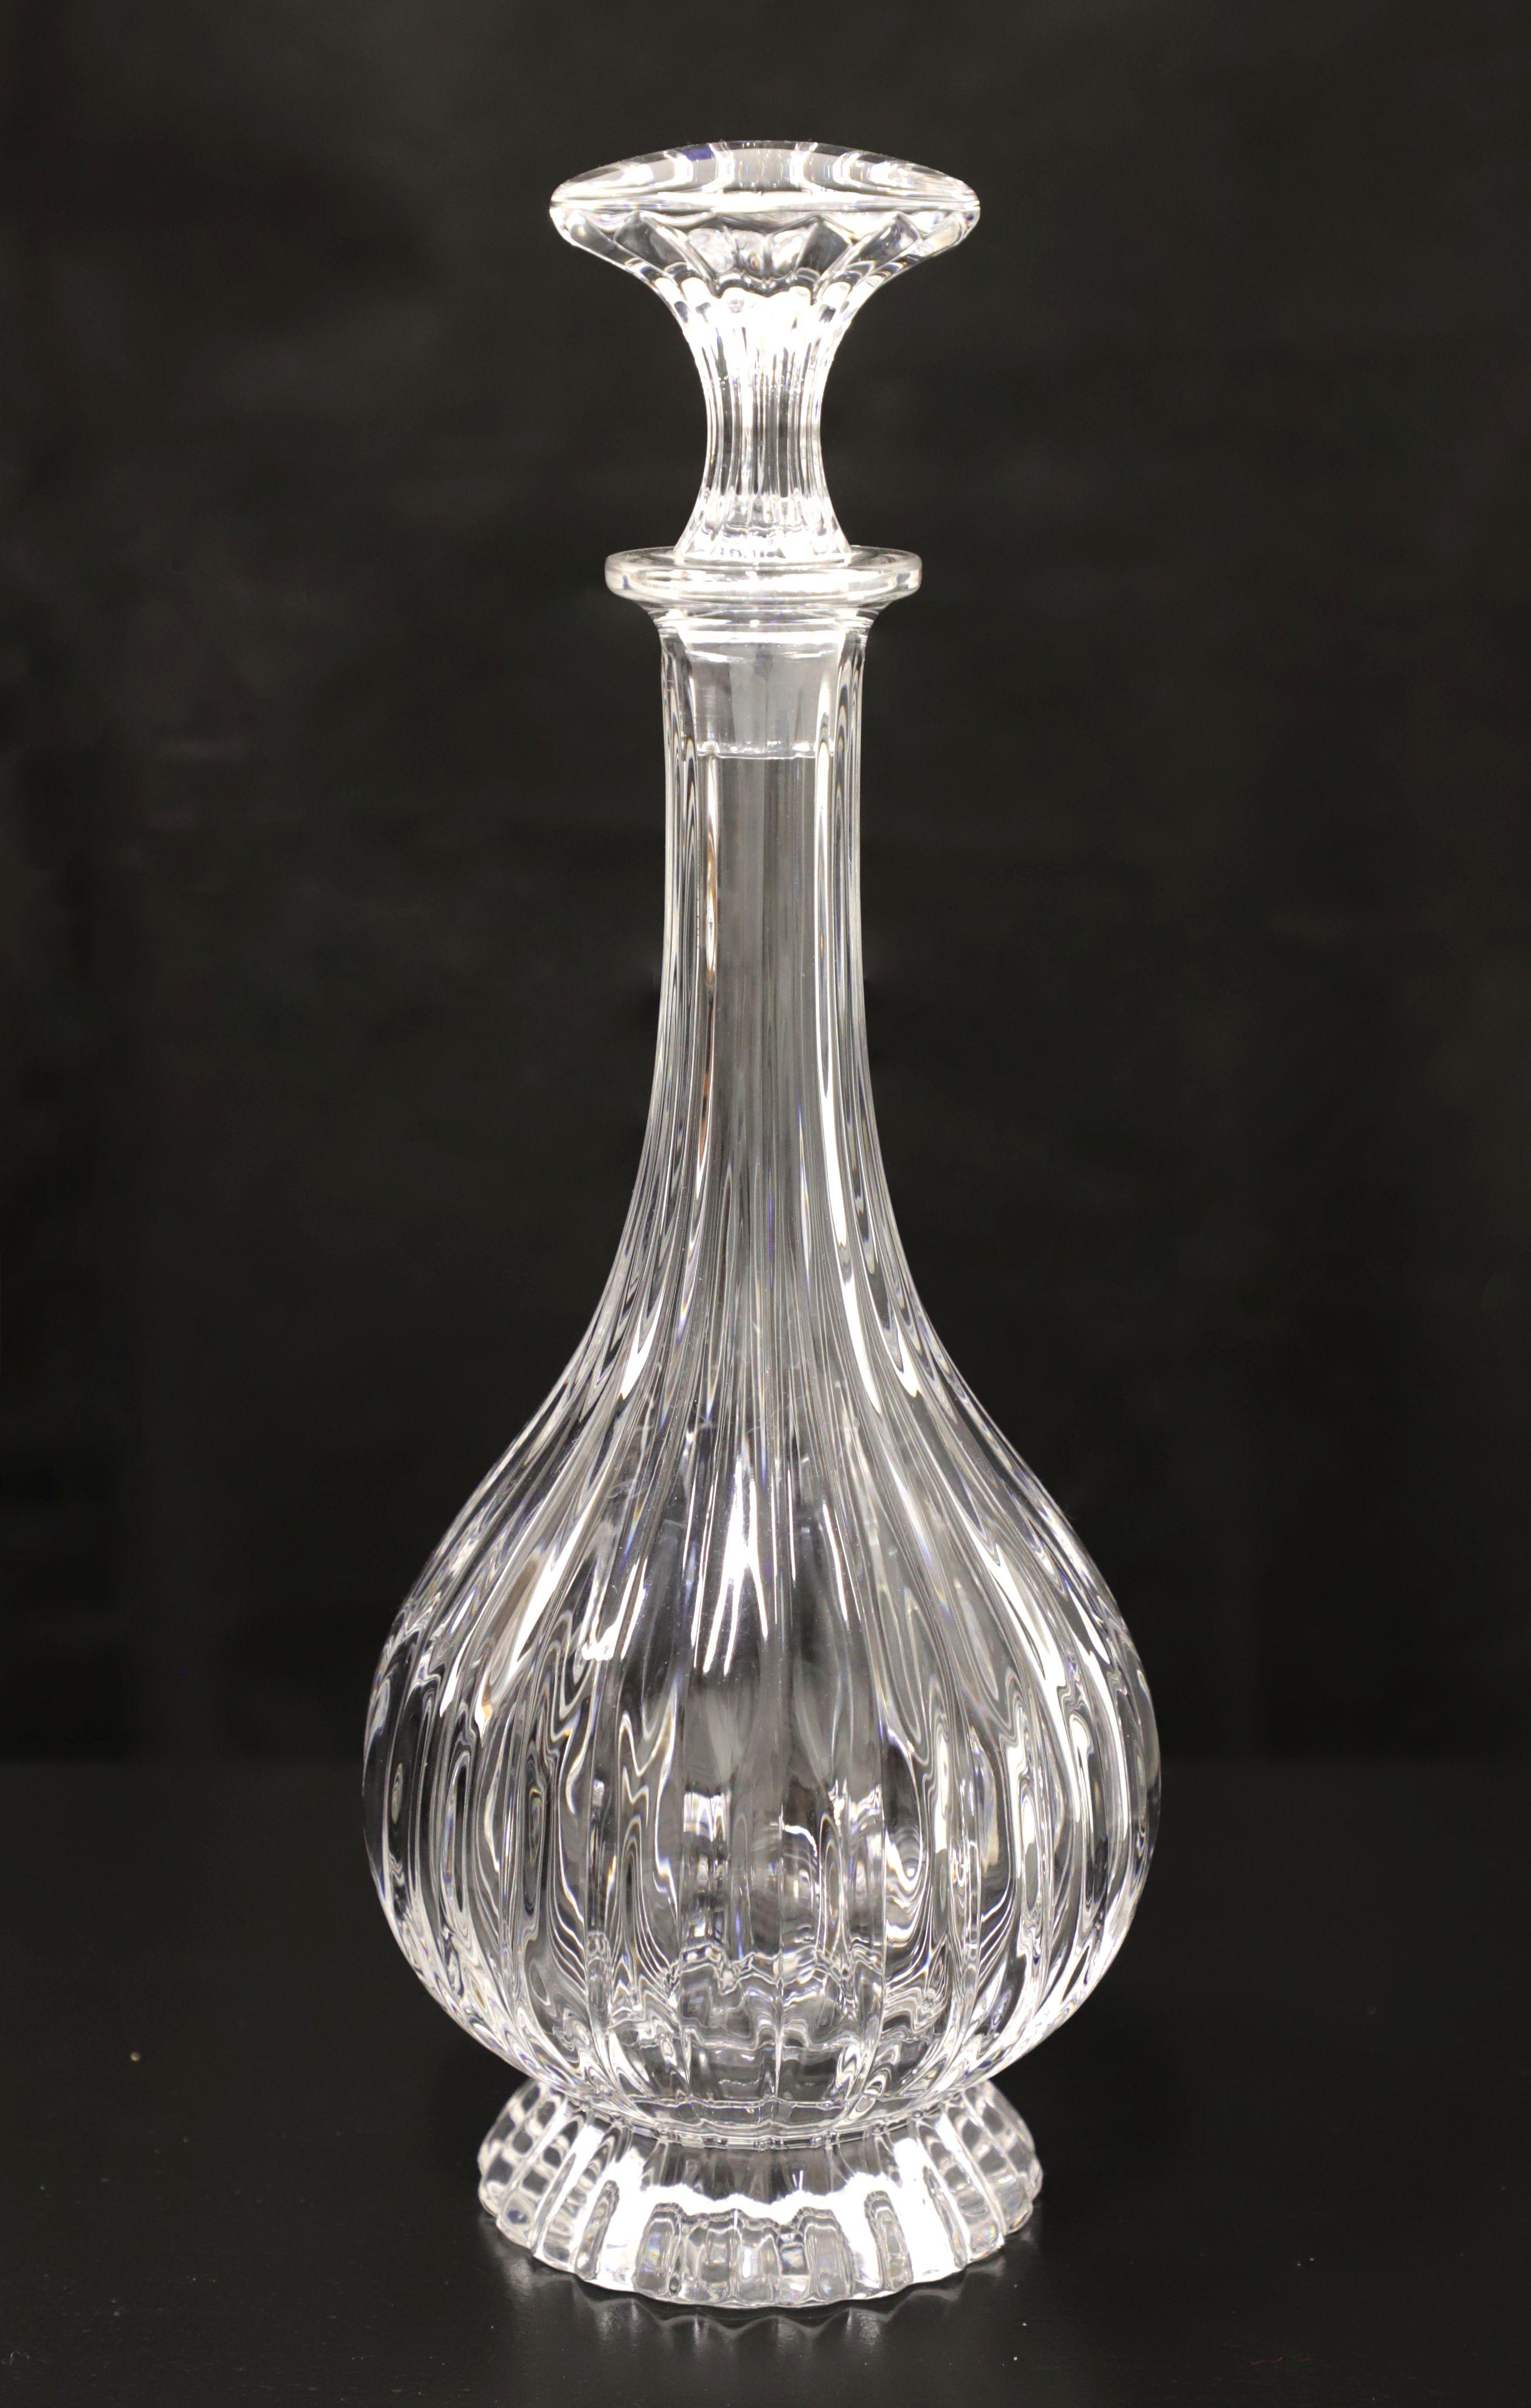 A Mid 20th Century crystal decanter. Clear crystal decanter with swirl pattern. Clear crystal swirl pattern stopper. Origin unknown, most likely the USA.

Measures: 5 W 5 D 13 H, Weighs Approximately: 3 lbs

Exceptionally good condition. No chips,